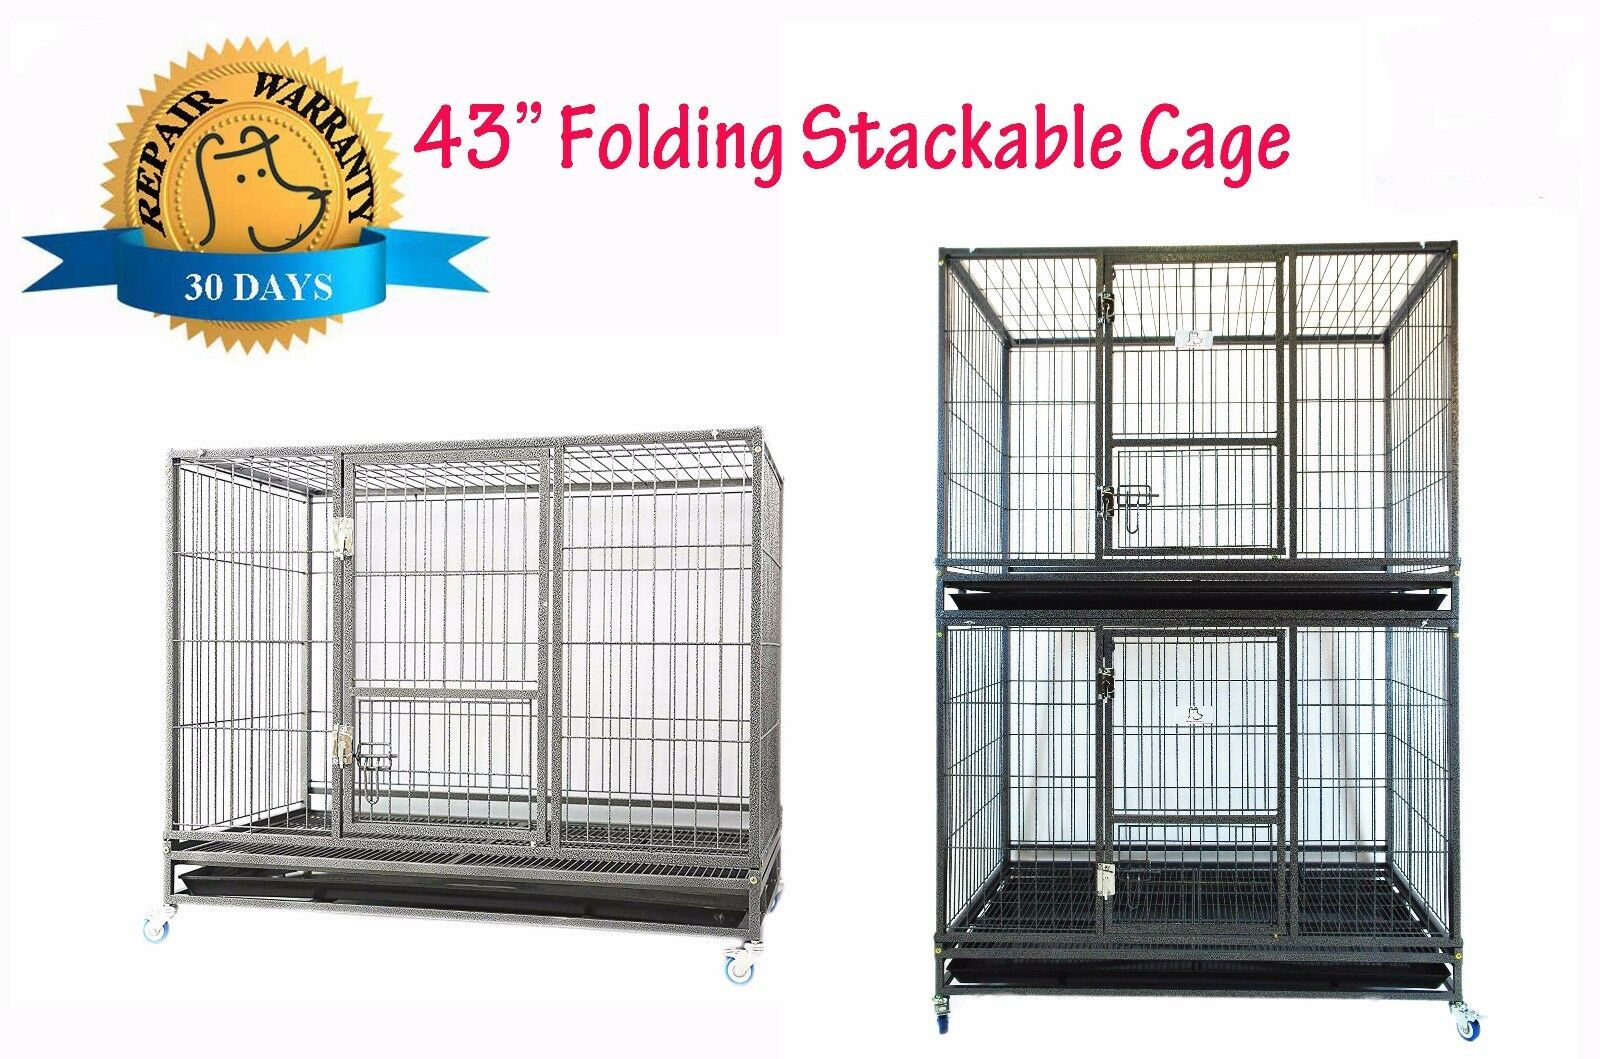 New Homey Pet 43" Stackable Heavy Duty Metal Dog Crate Cage Tray Or Plastic Grid